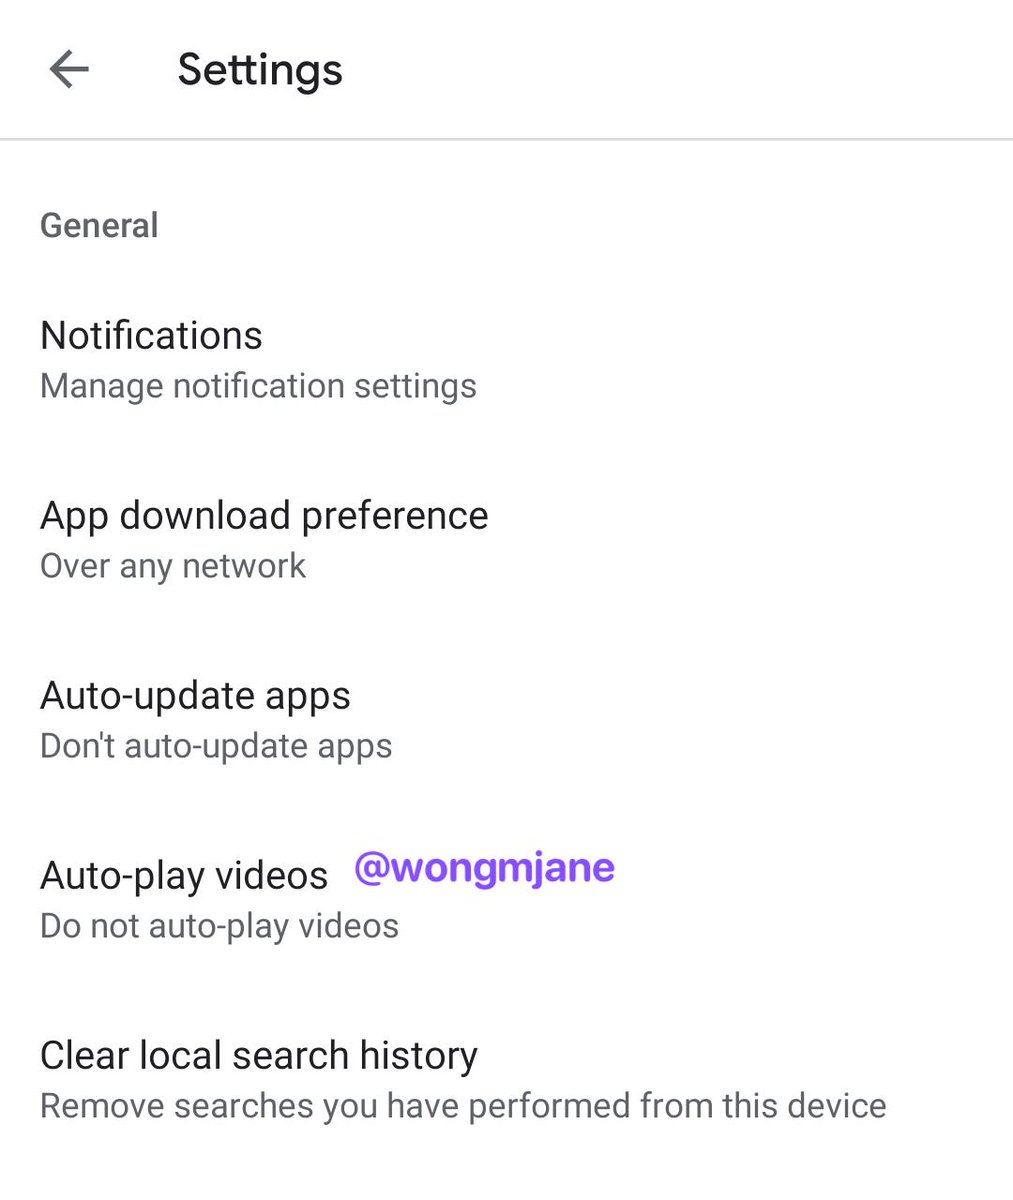 Google Play Store will provide a toggle setting for video auto-playing